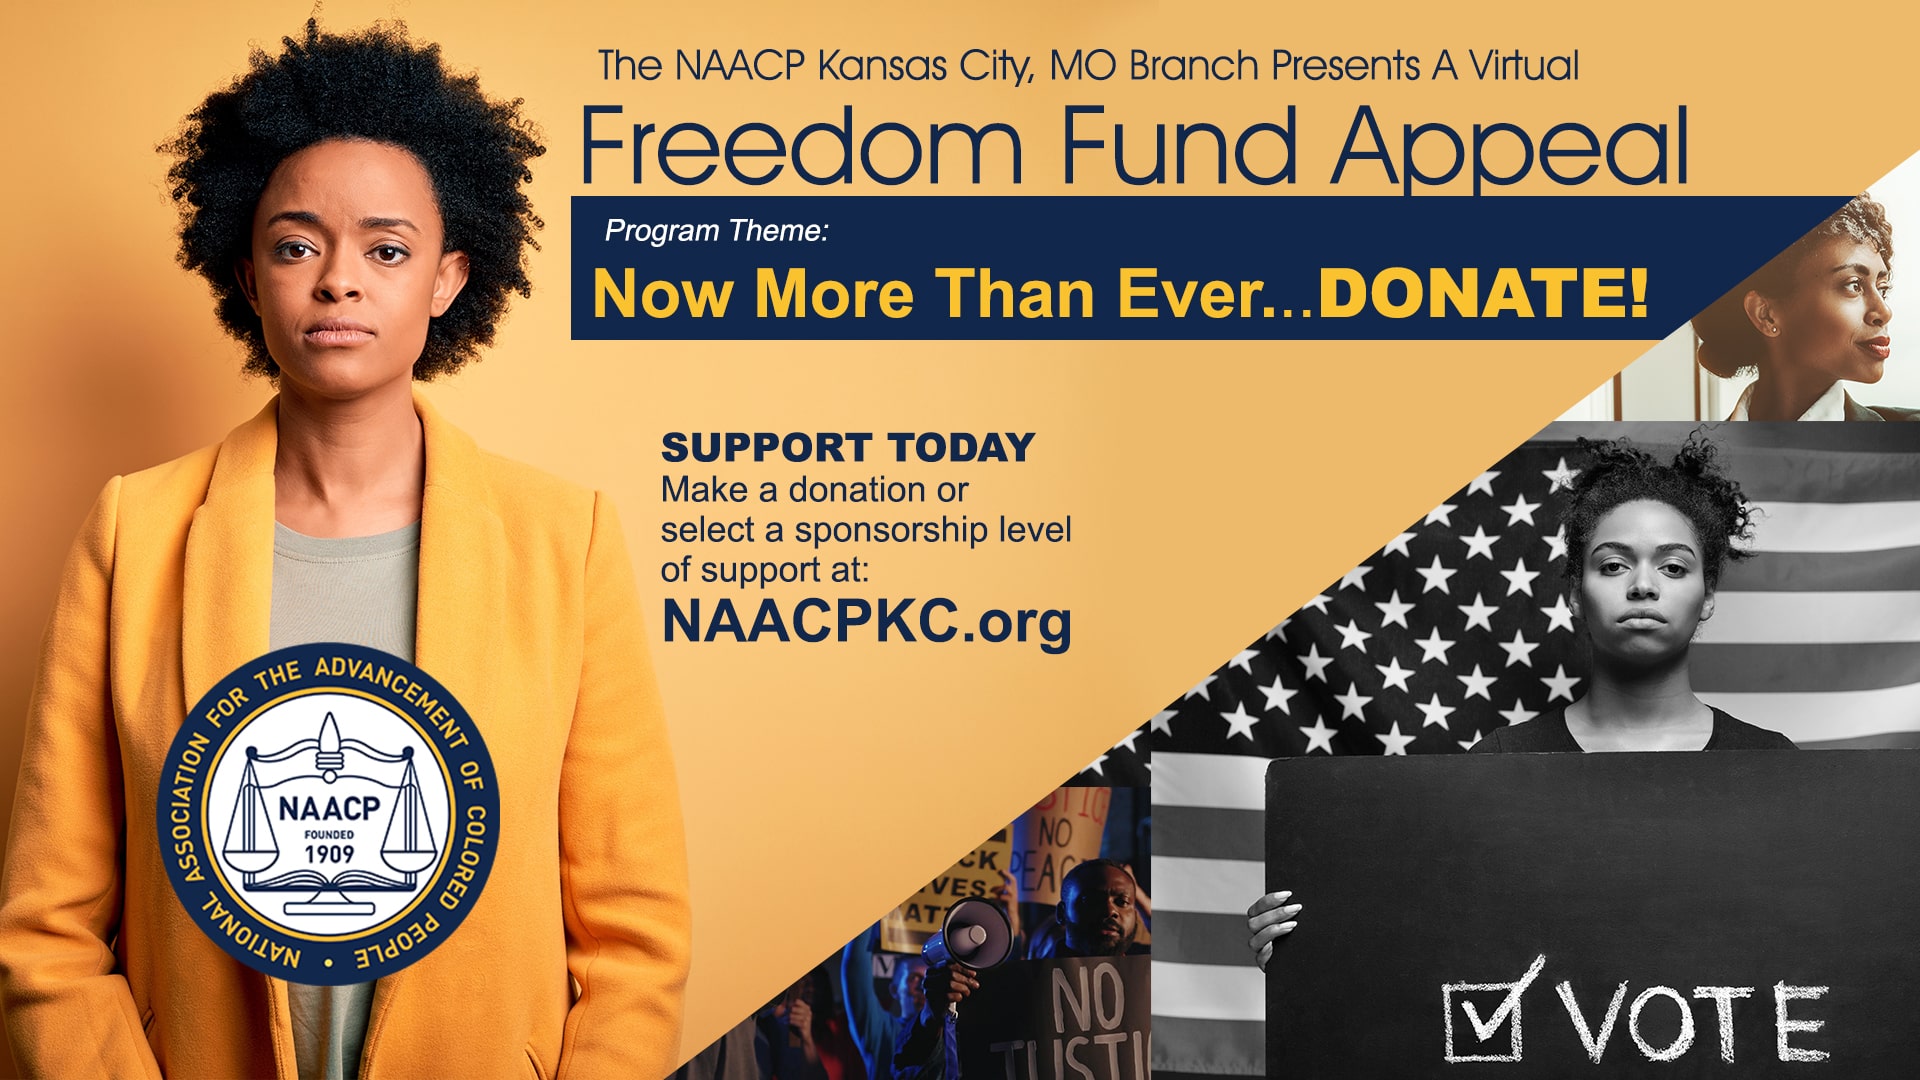 naacp freedom fund Appesl